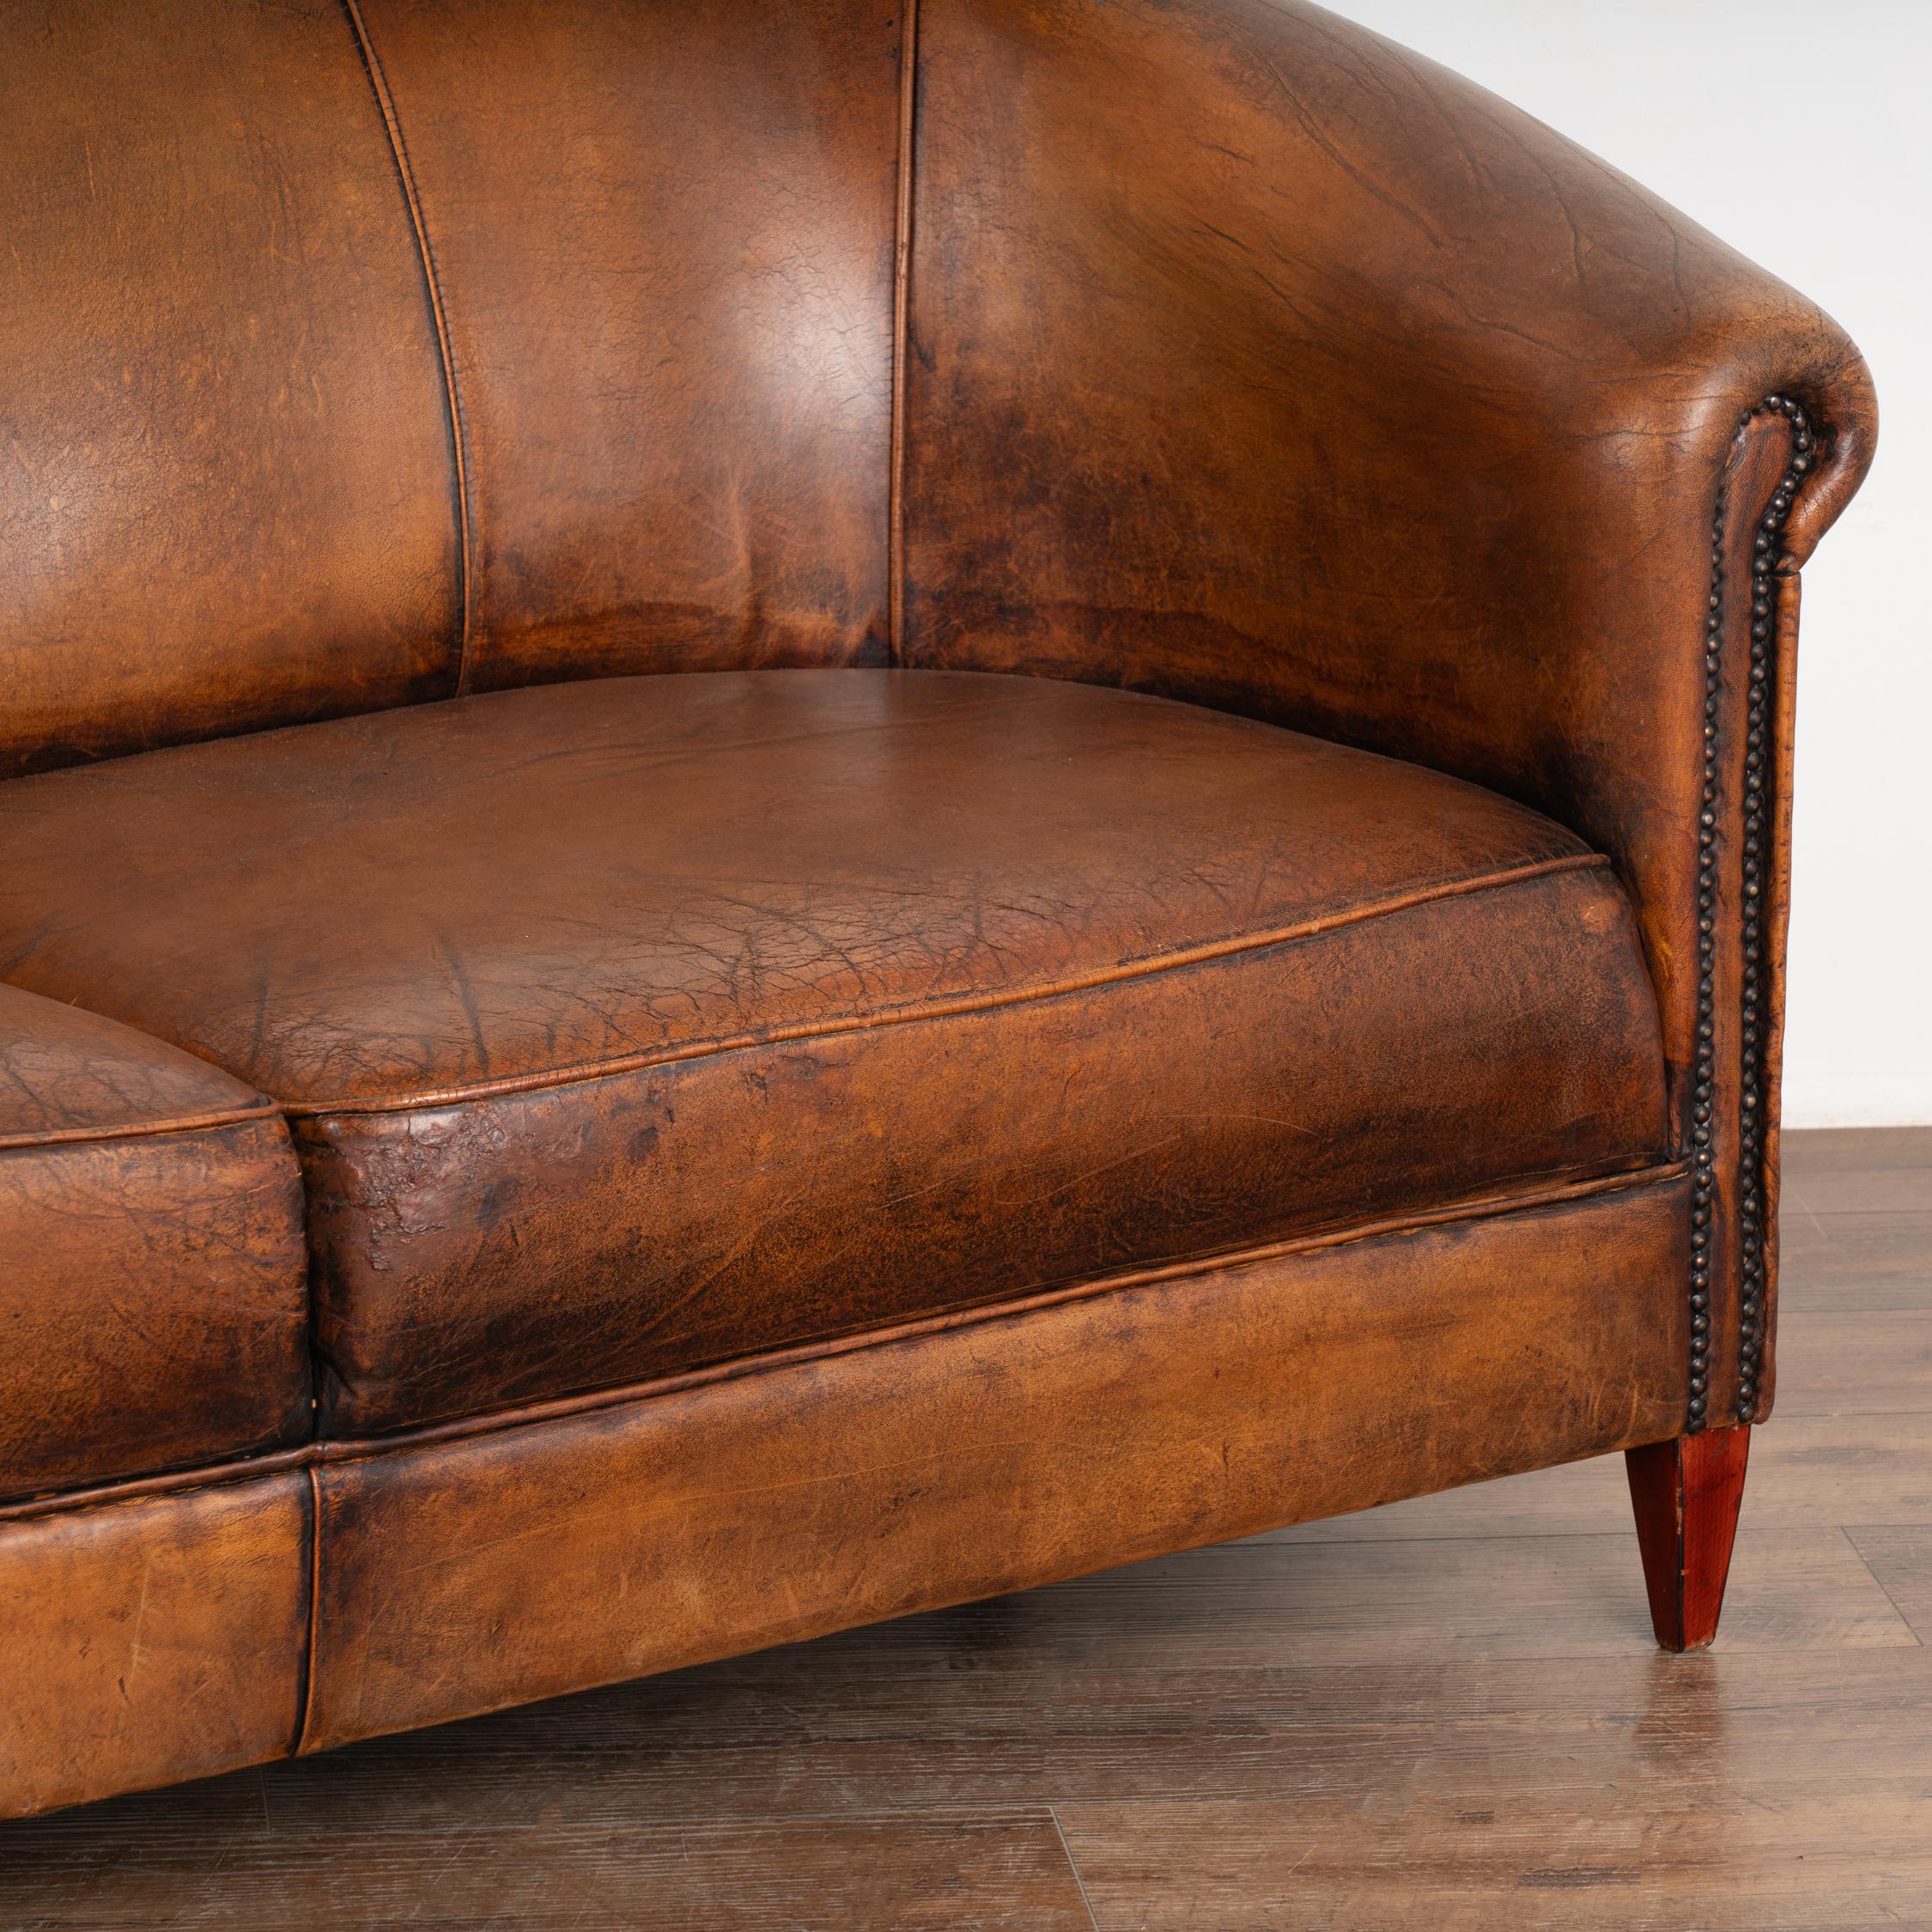 Dutch Vintage Brown Leather 2-Seat Sofa Loveseat from The Netherlands, circa 1960-70